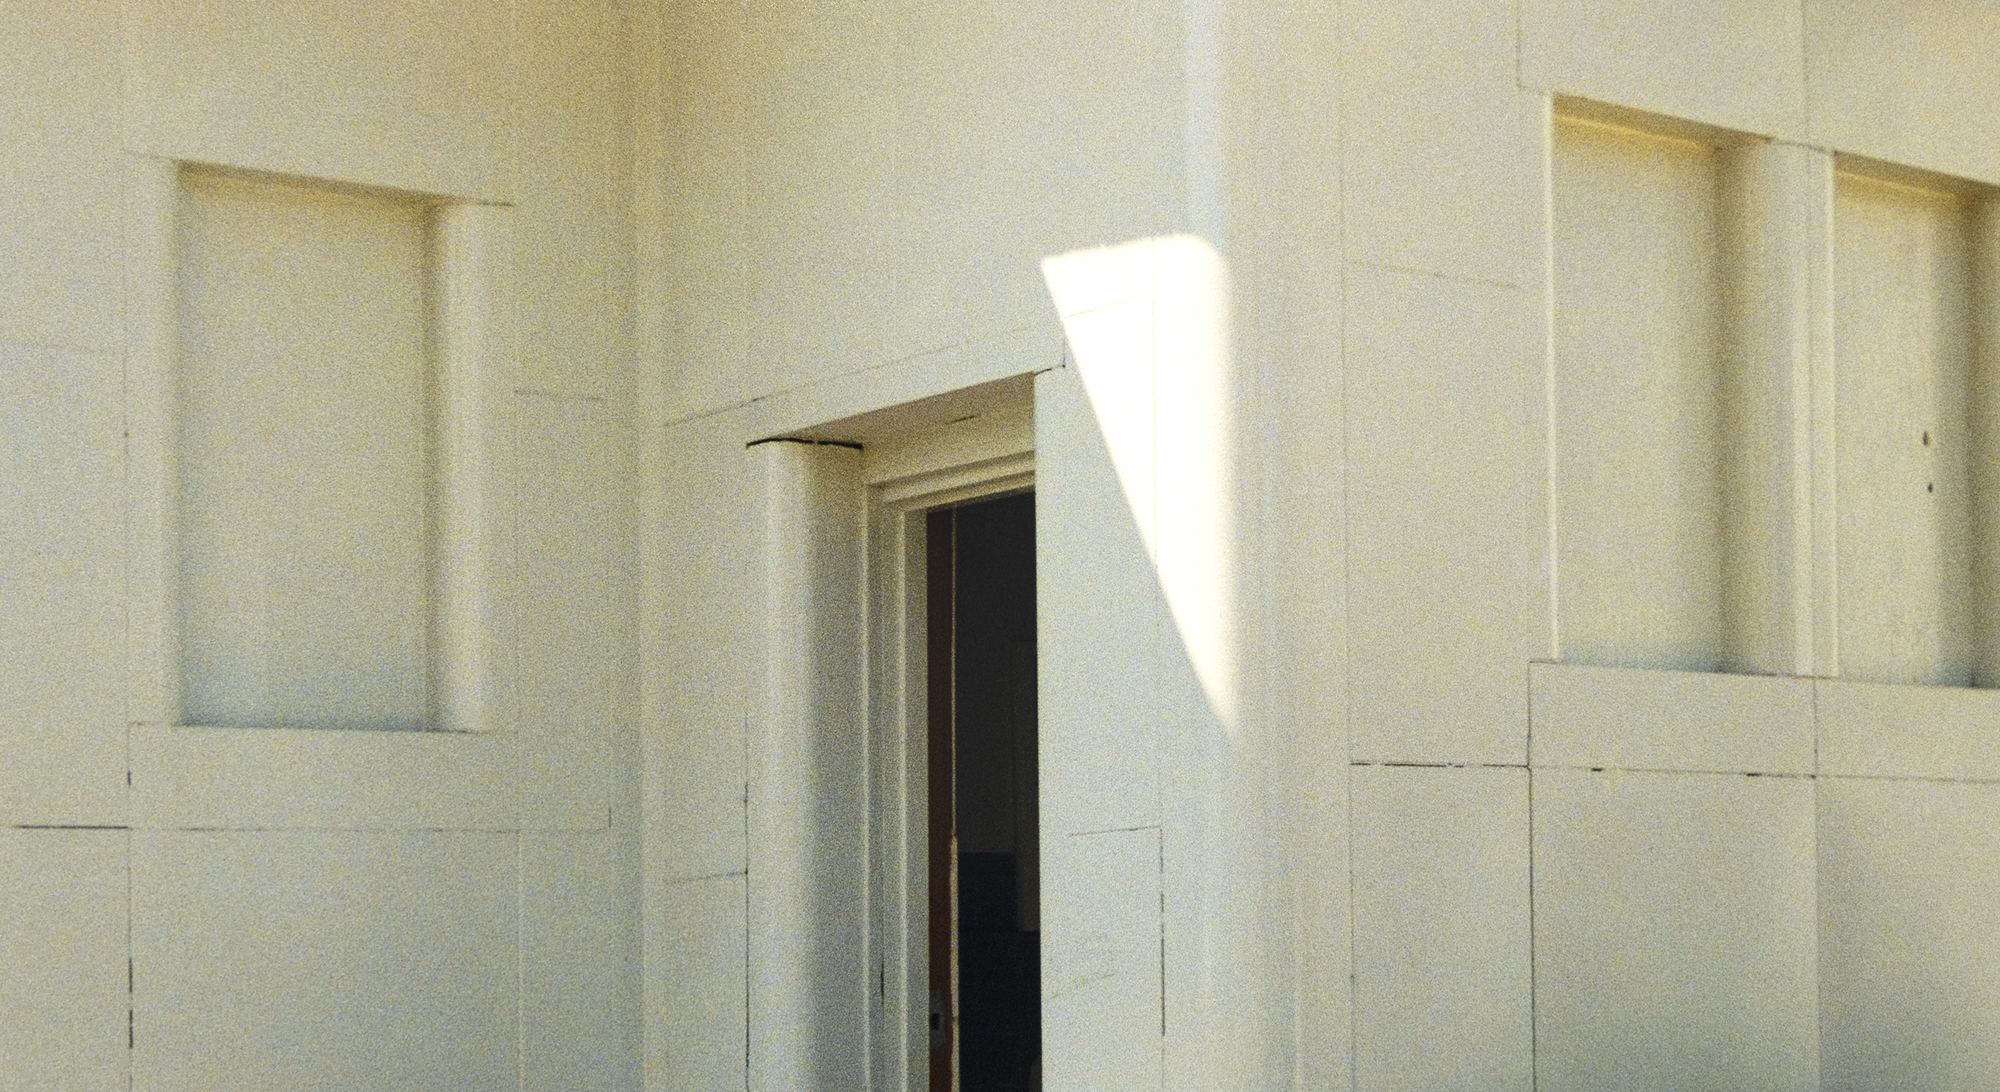 WILLIAM B. EGGLESTON - Untitled (From Democratic Forest) - archival pigment print - 31 1/2 x 48 in.